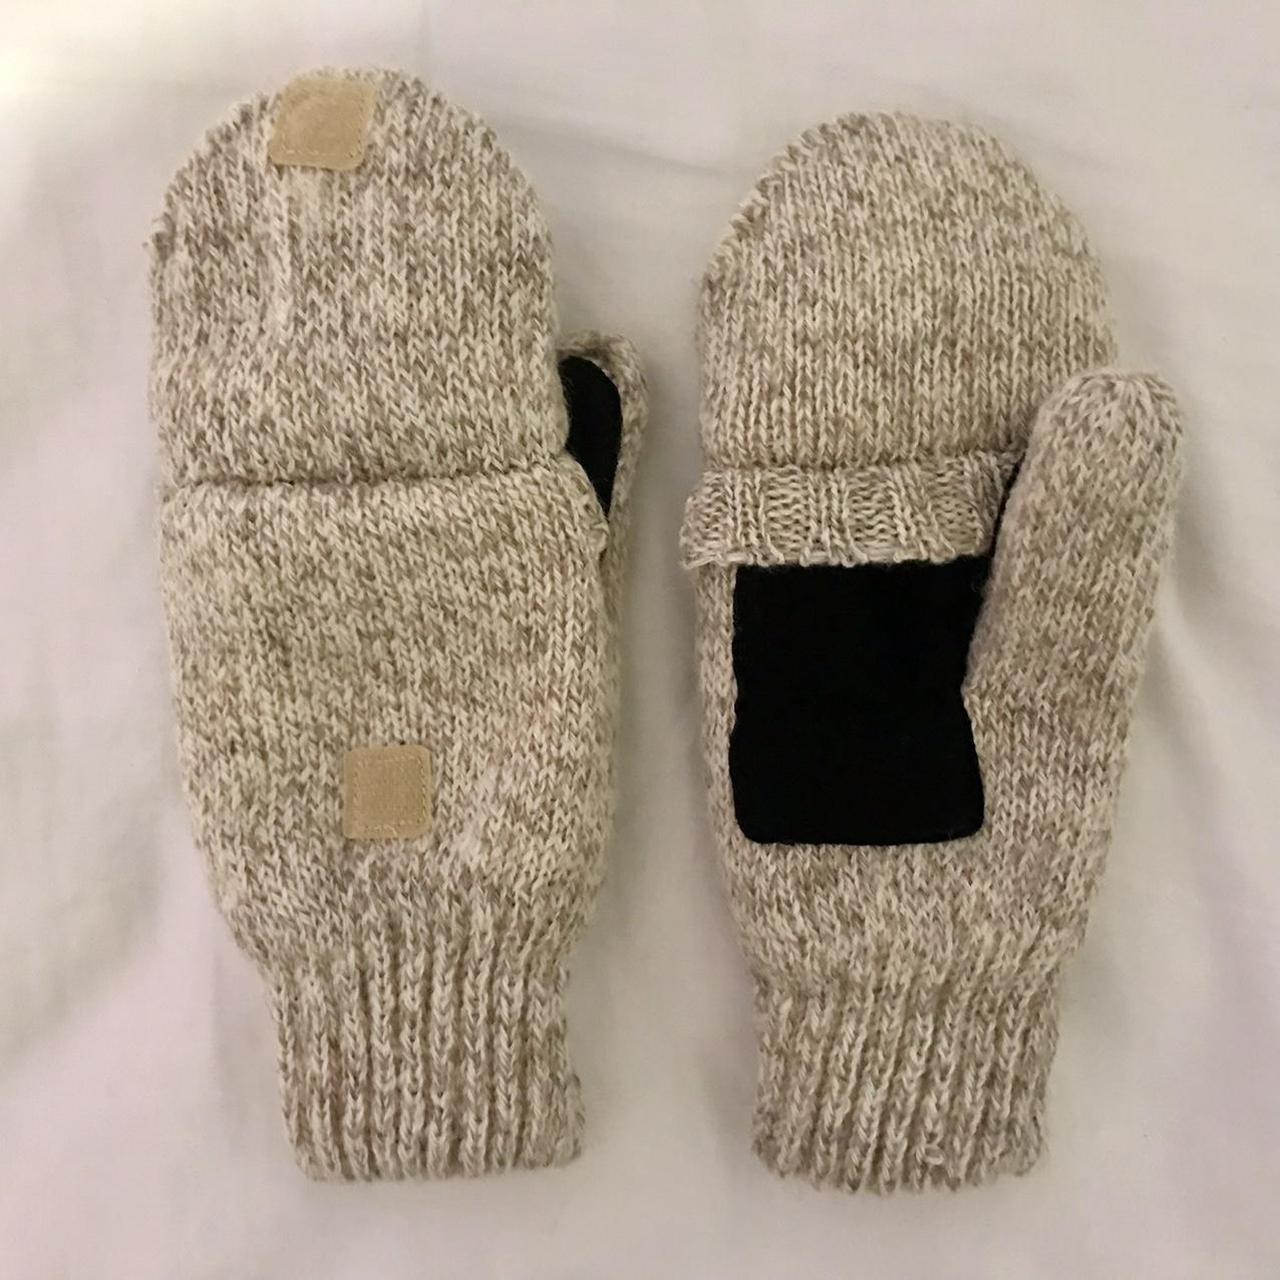 Product Image 1 - Beige winter mittens/gloves
You can wear